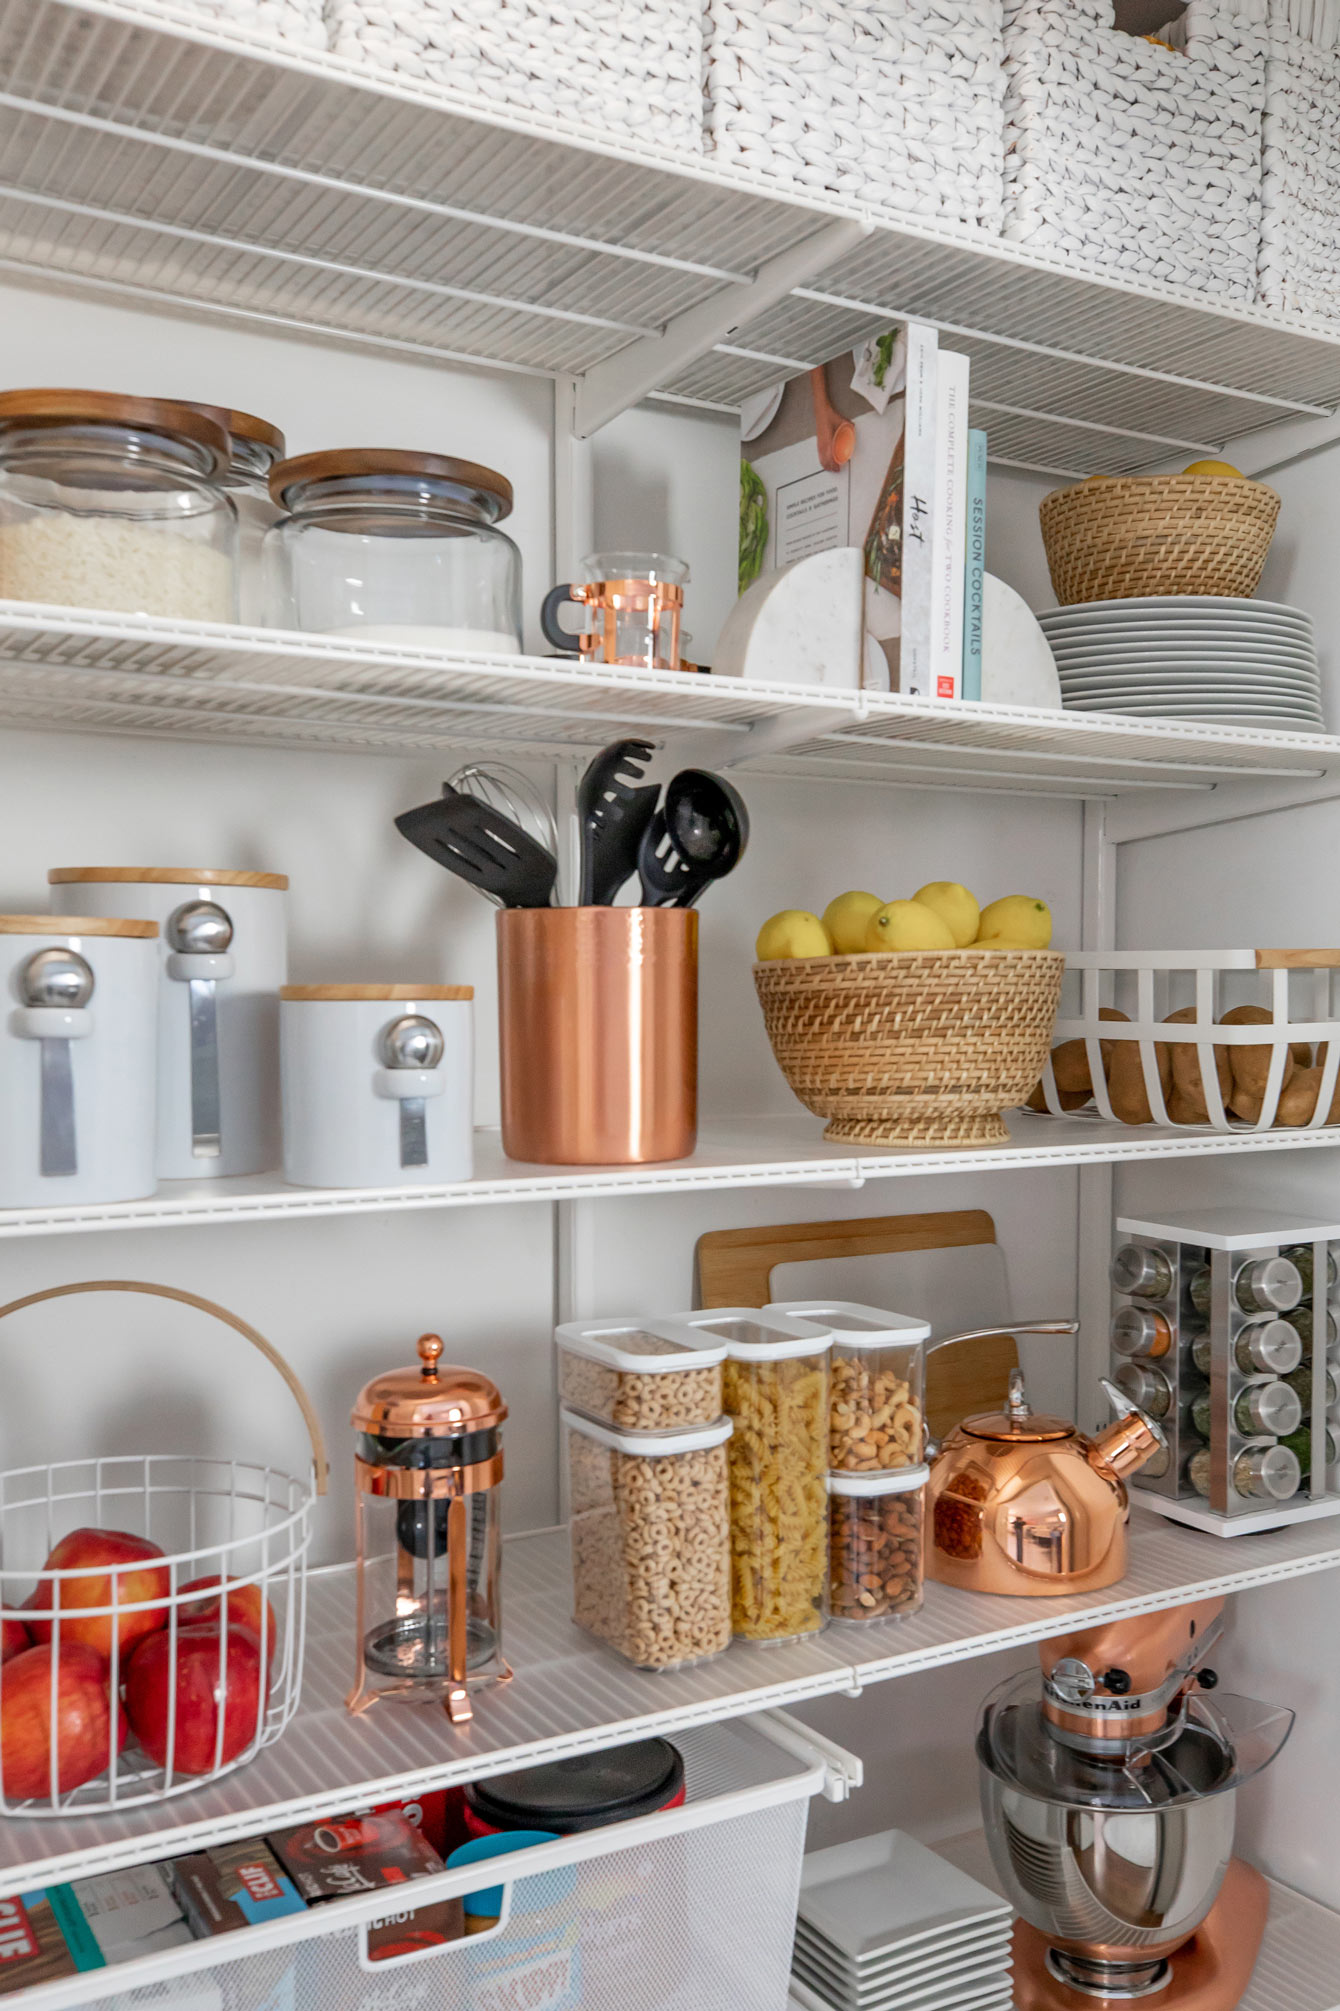 Pantry Storage Solutions for the Home - Style Charade